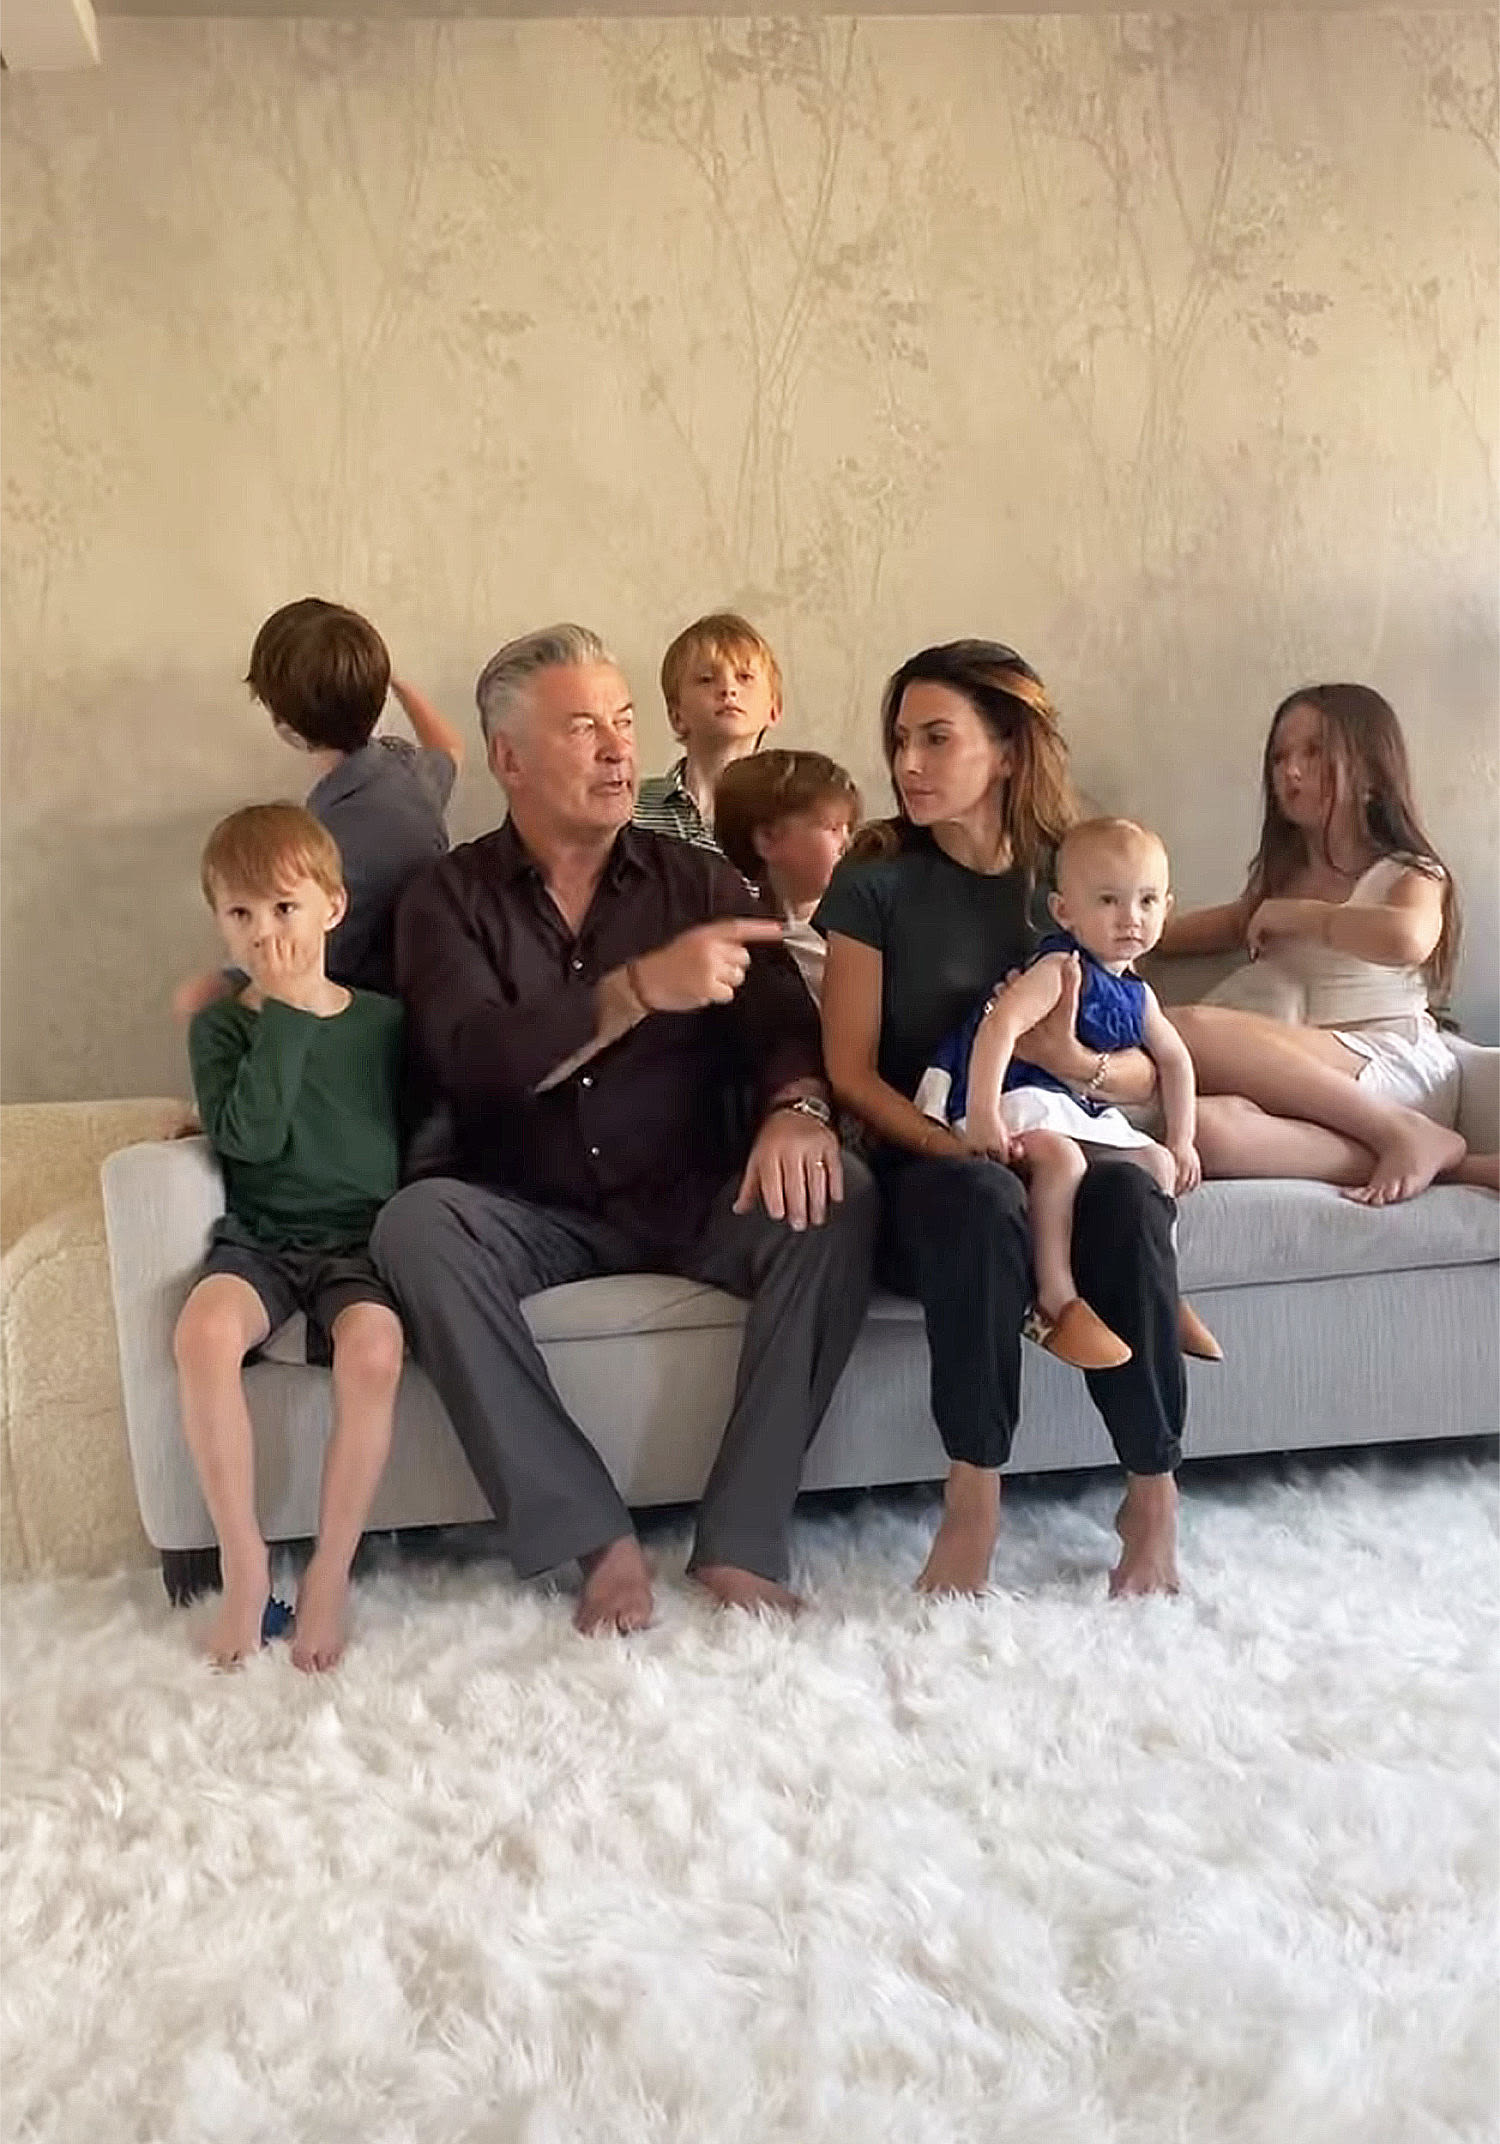 Alec and Hilaria Baldwin announce new TLC reality series